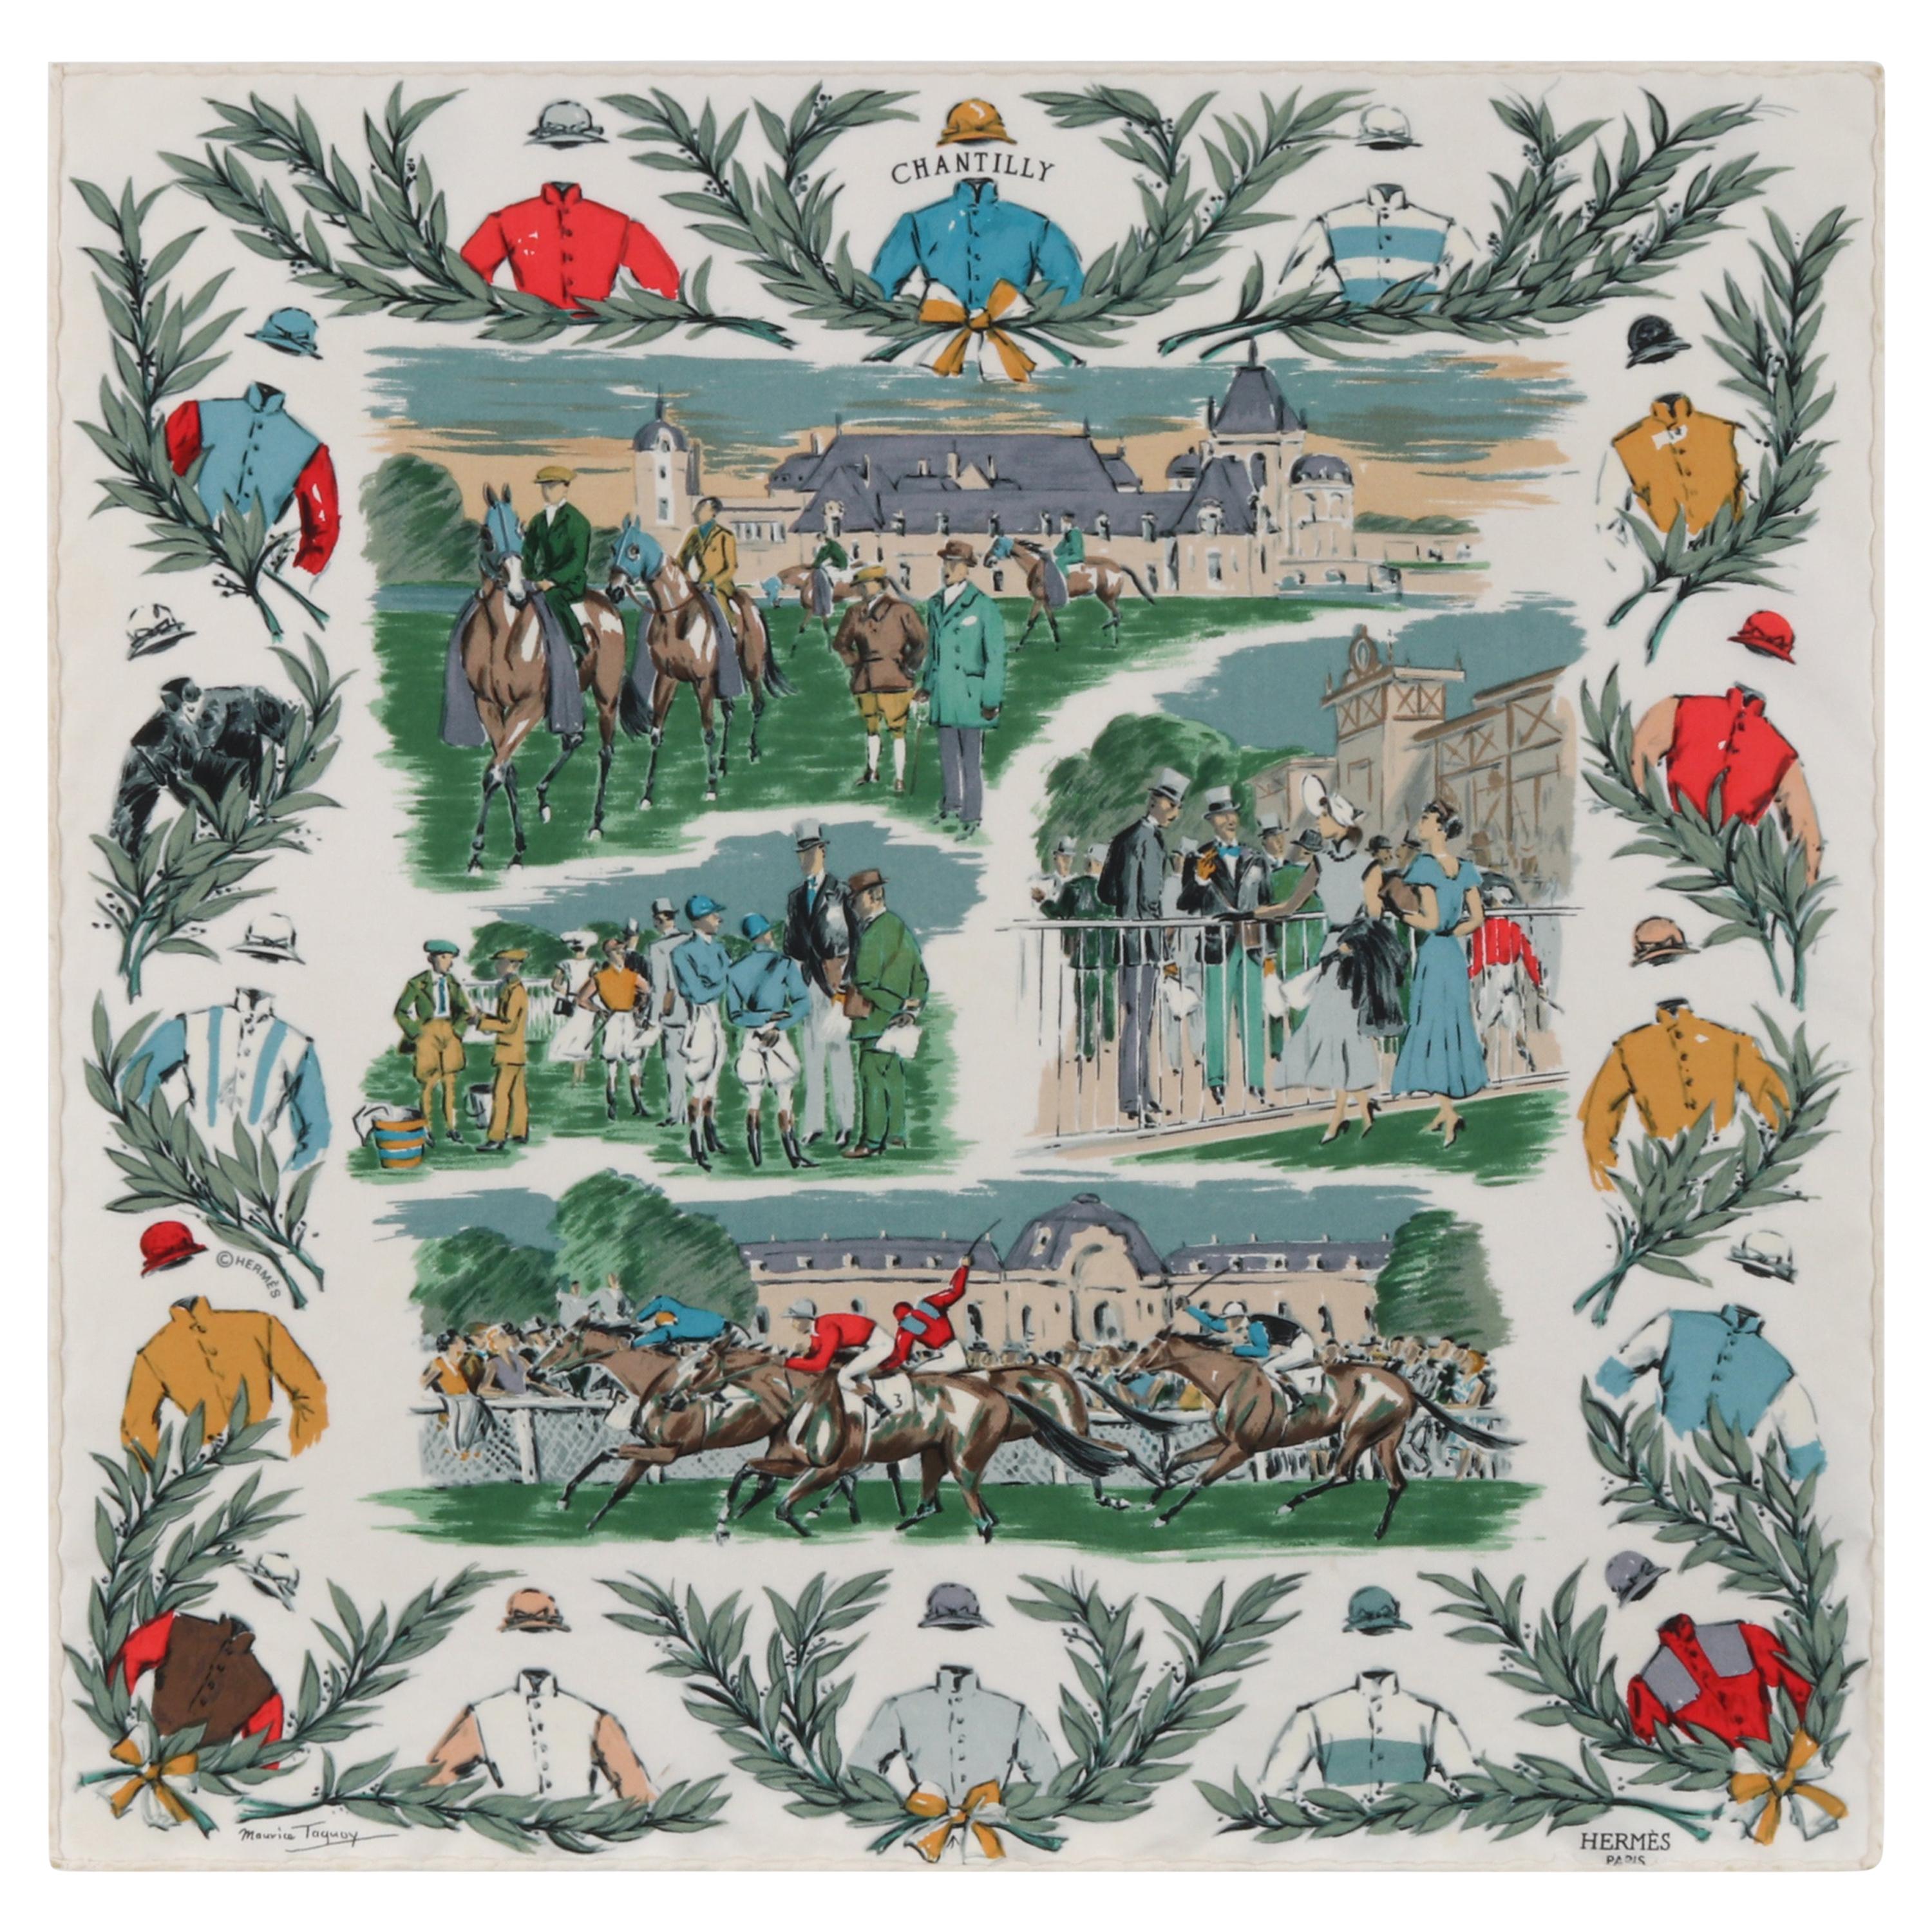 HERMES c.1993 Maurice De Taquoy "Courses a Chantilly" Equestrian Race Silk Scarf